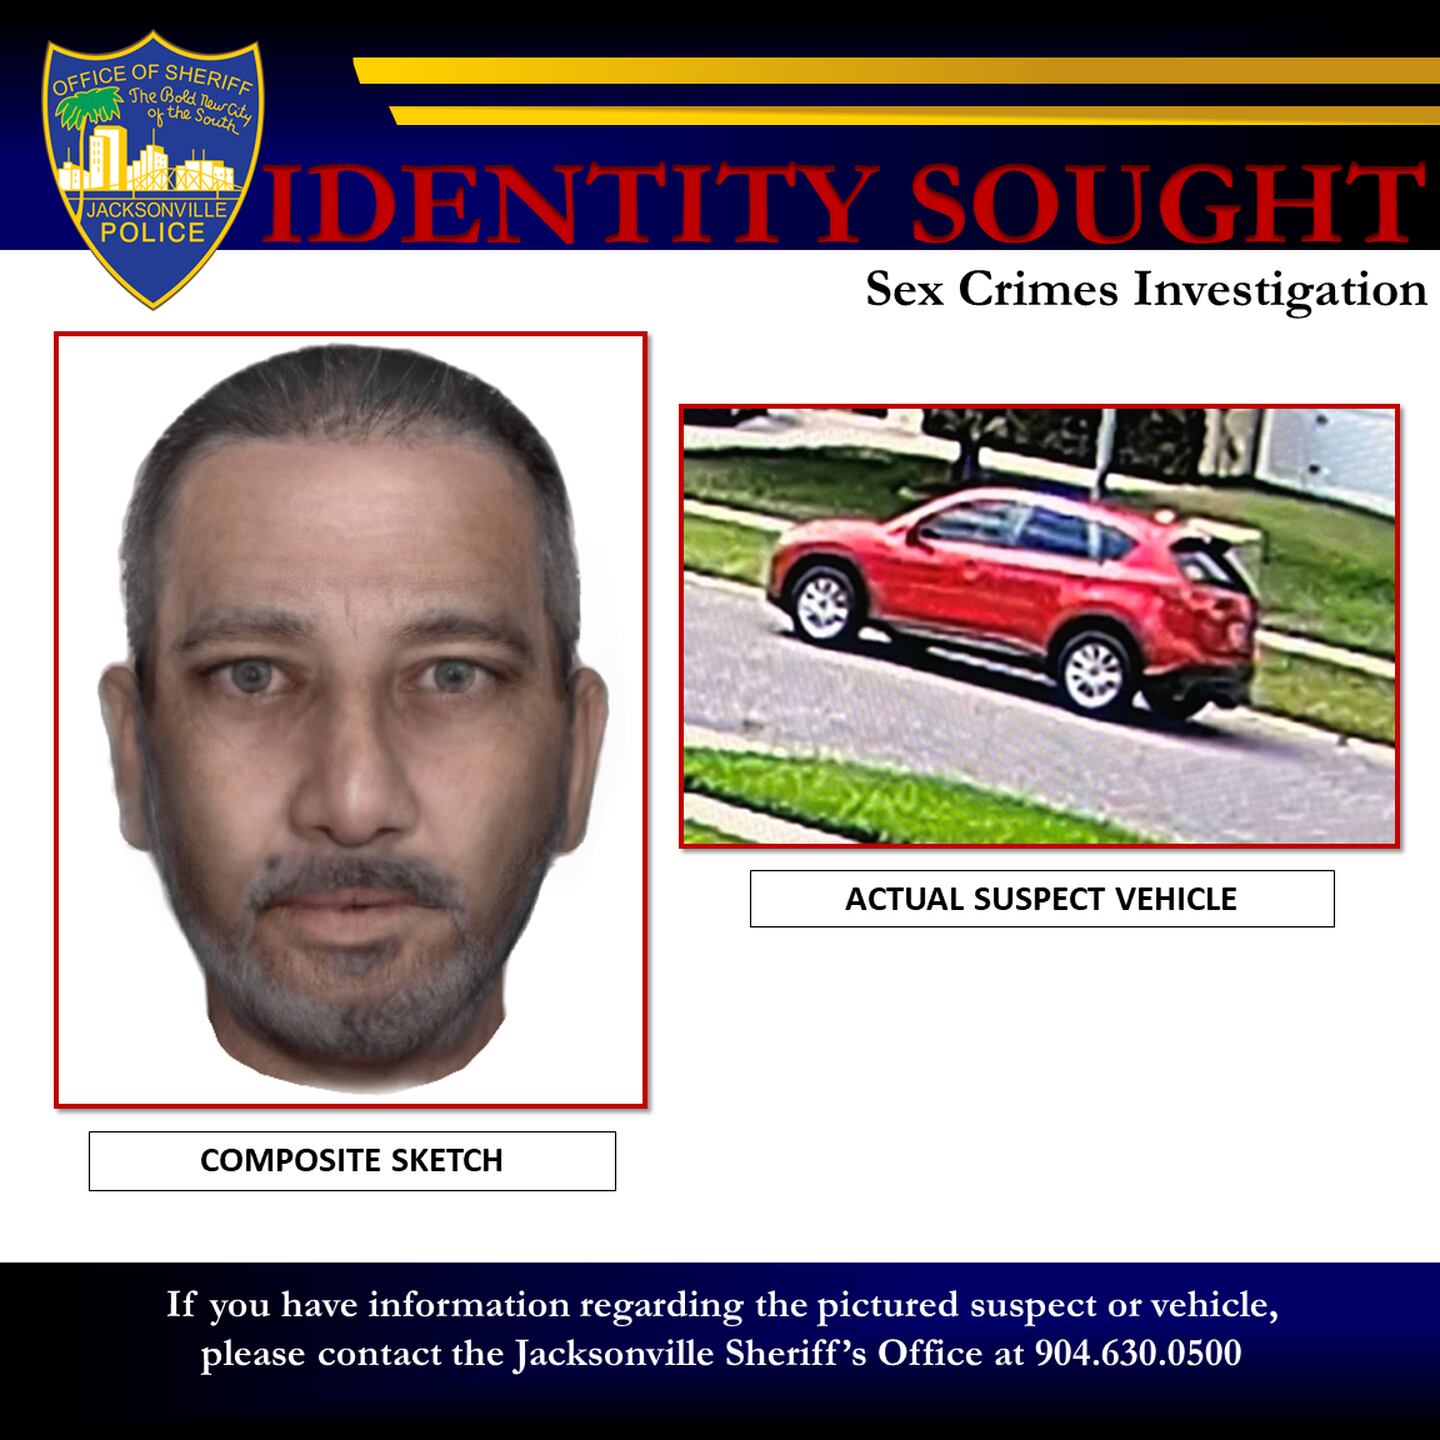 The Jacksonville Sheriff's Office has released a composite sketch and suspect vehicle in sex battery cases.